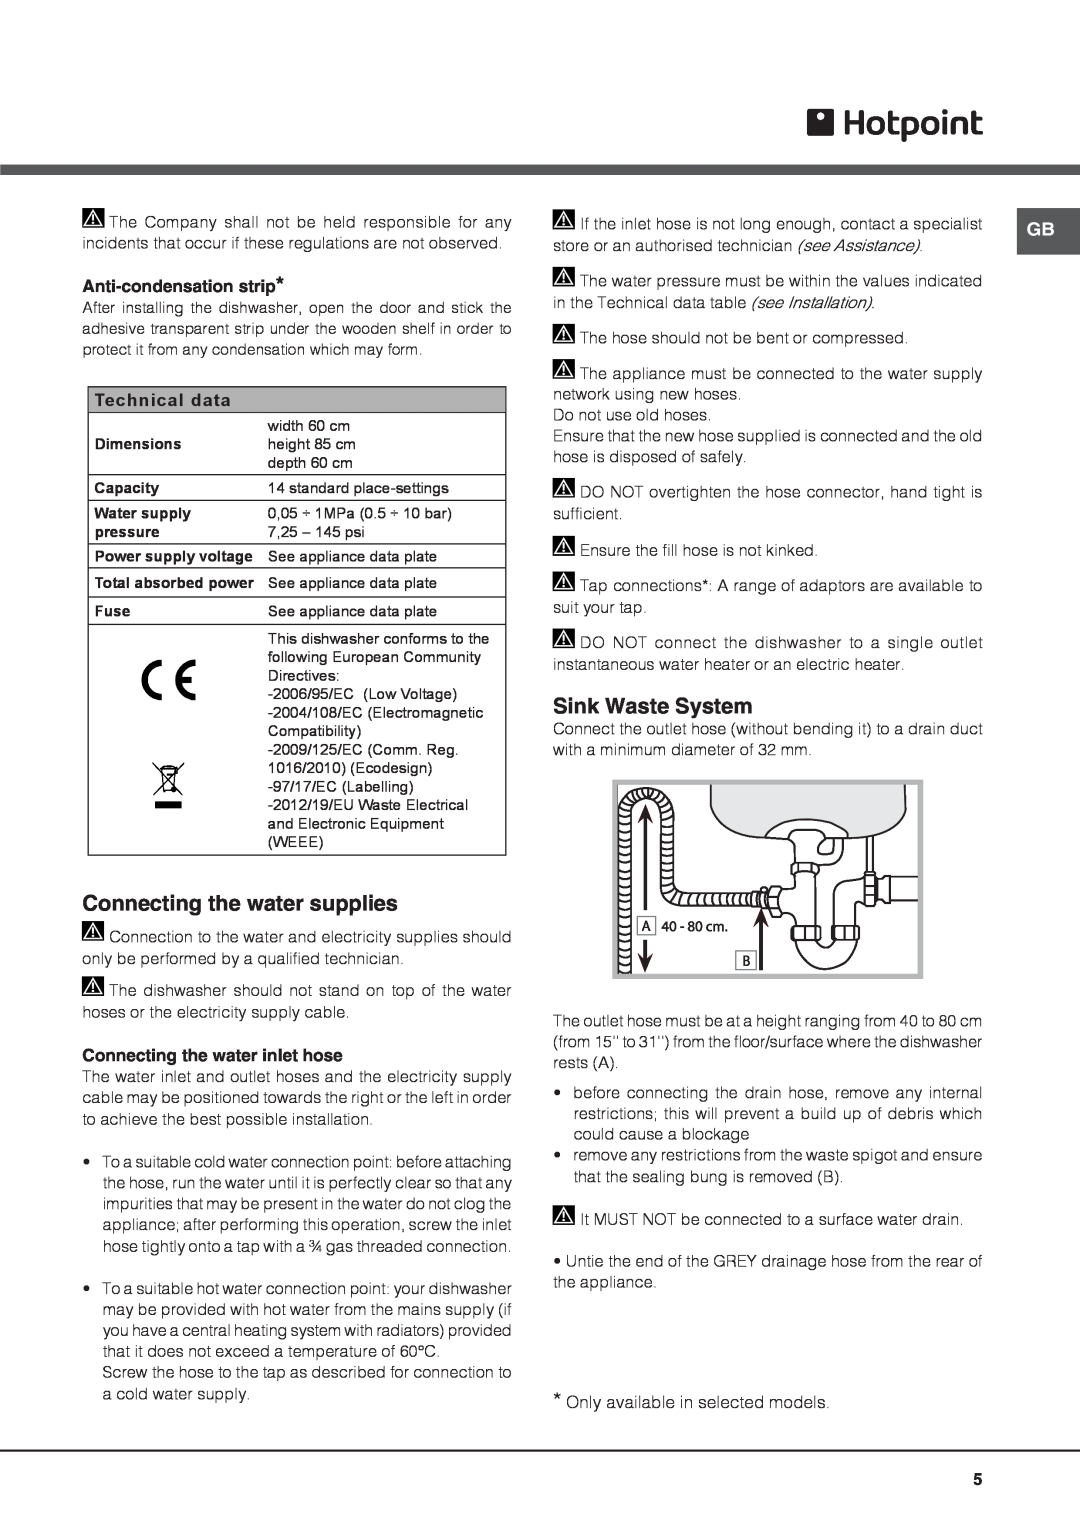 Hotpoint FDUD 44110 ULTIMA manual Connecting the water supplies, Sink Waste System, Anti-condensationstrip, Technical data 